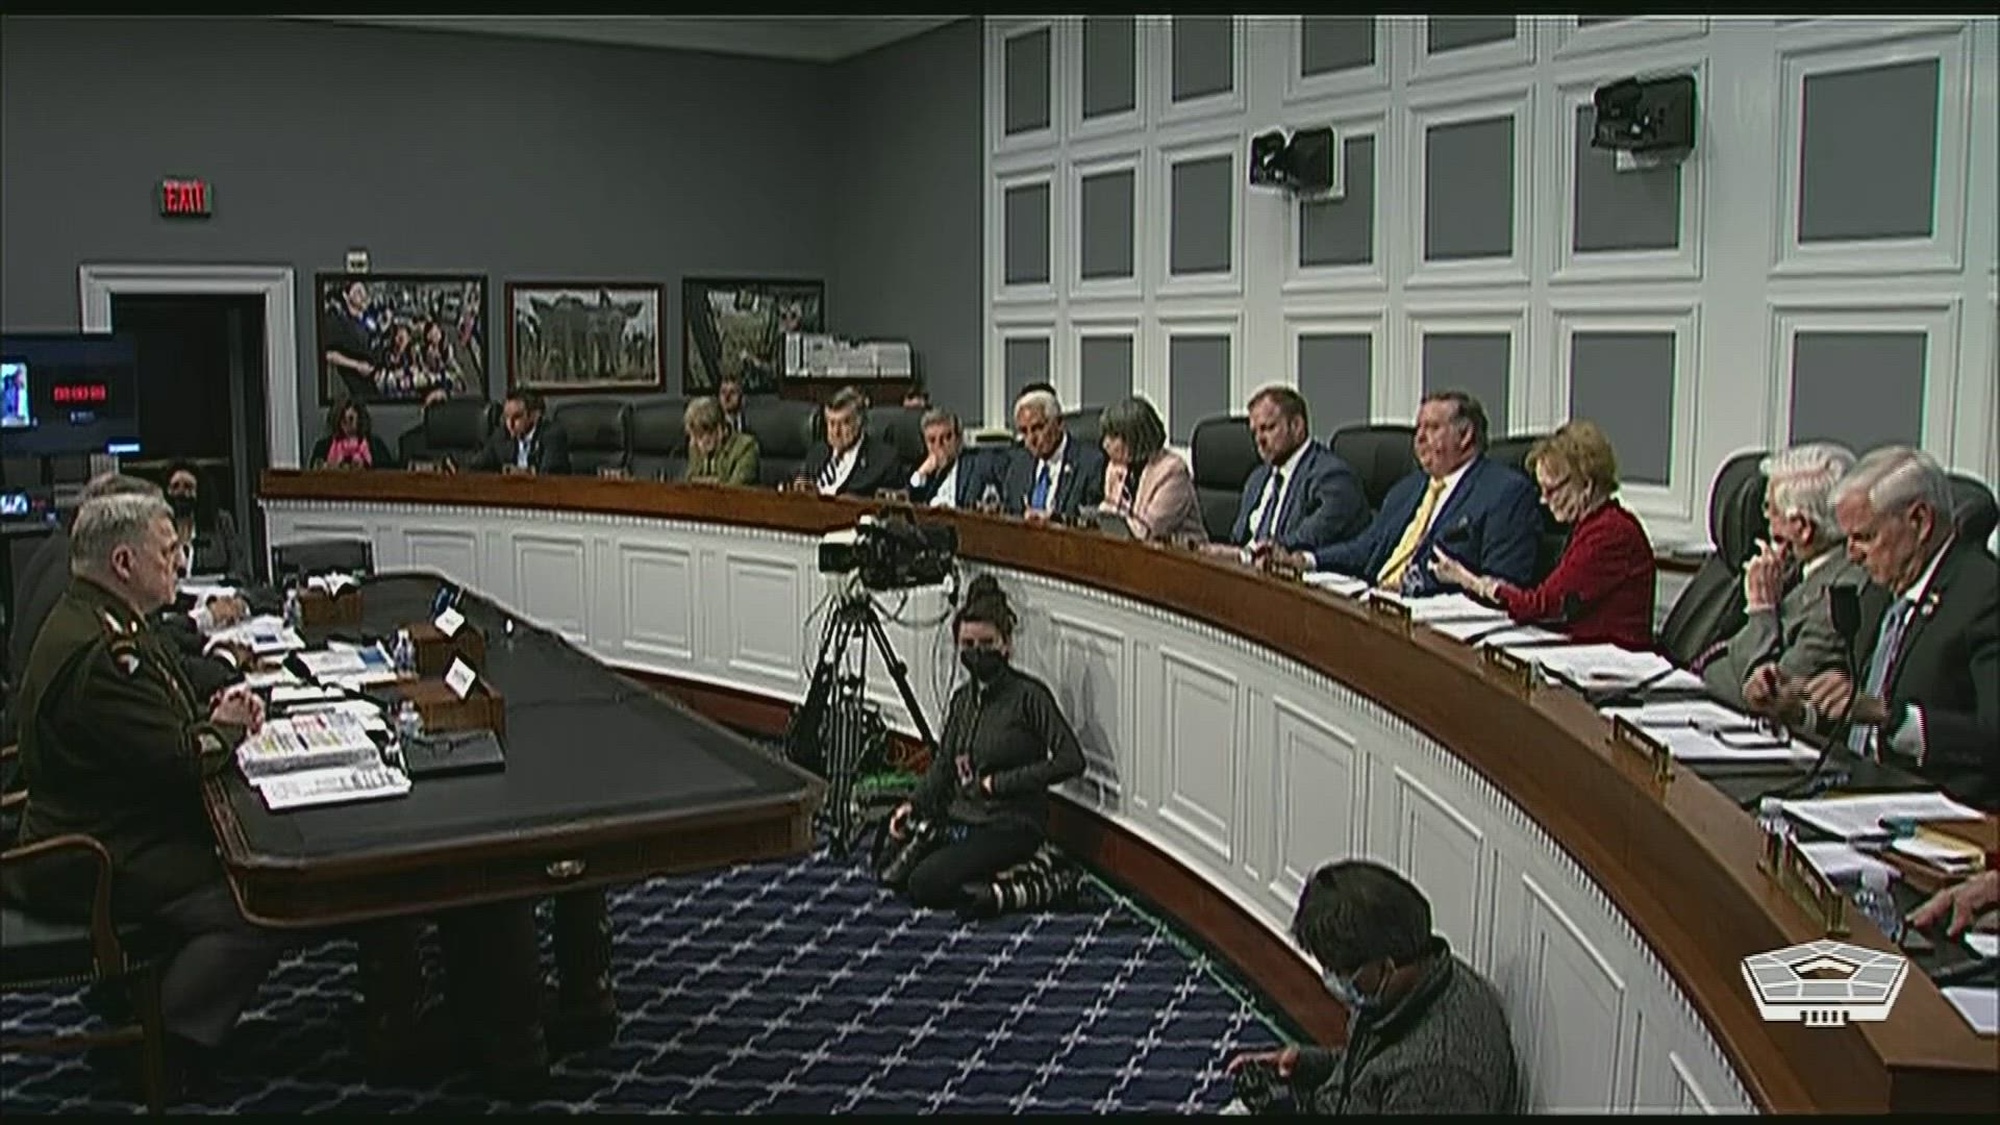 Secretary of Defense Lloyd J. Austin III; Michael J. McCord, undersecretary of defense (comptroller) and chief financial officer; and Army Gen. Mark A. Milley, chairman of the Joint Chiefs of Staff, testify to the House Appropriations Committee subcommittee on Defense regarding the DOD budget for fiscal year 2023.